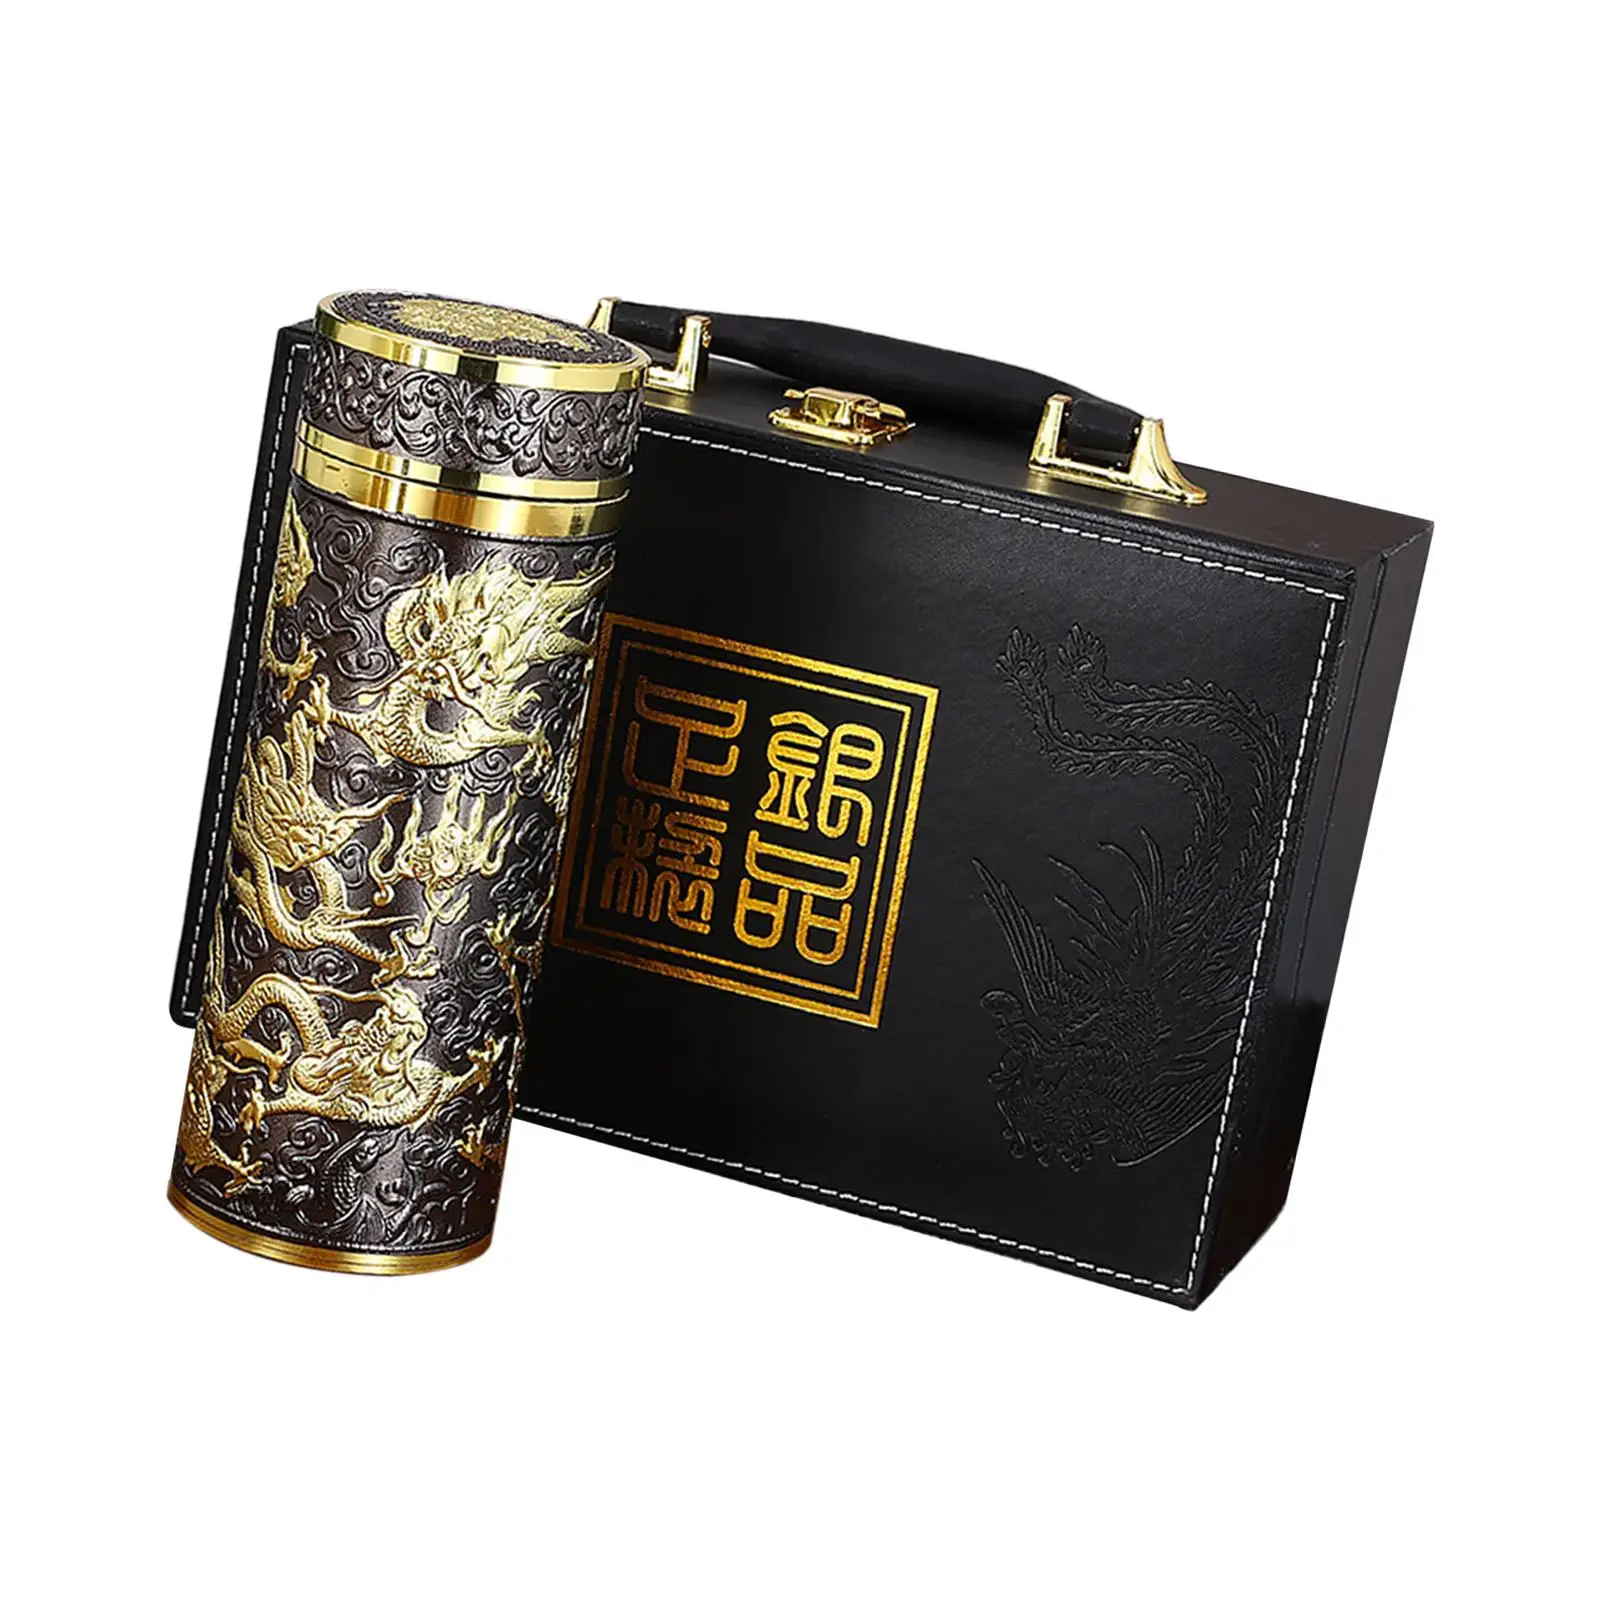 Chinese Dragon Insulated Water Bottle for Road Trips, Sporting Events, Car Diameter x Height 7x19cm Hand Wash Recommended